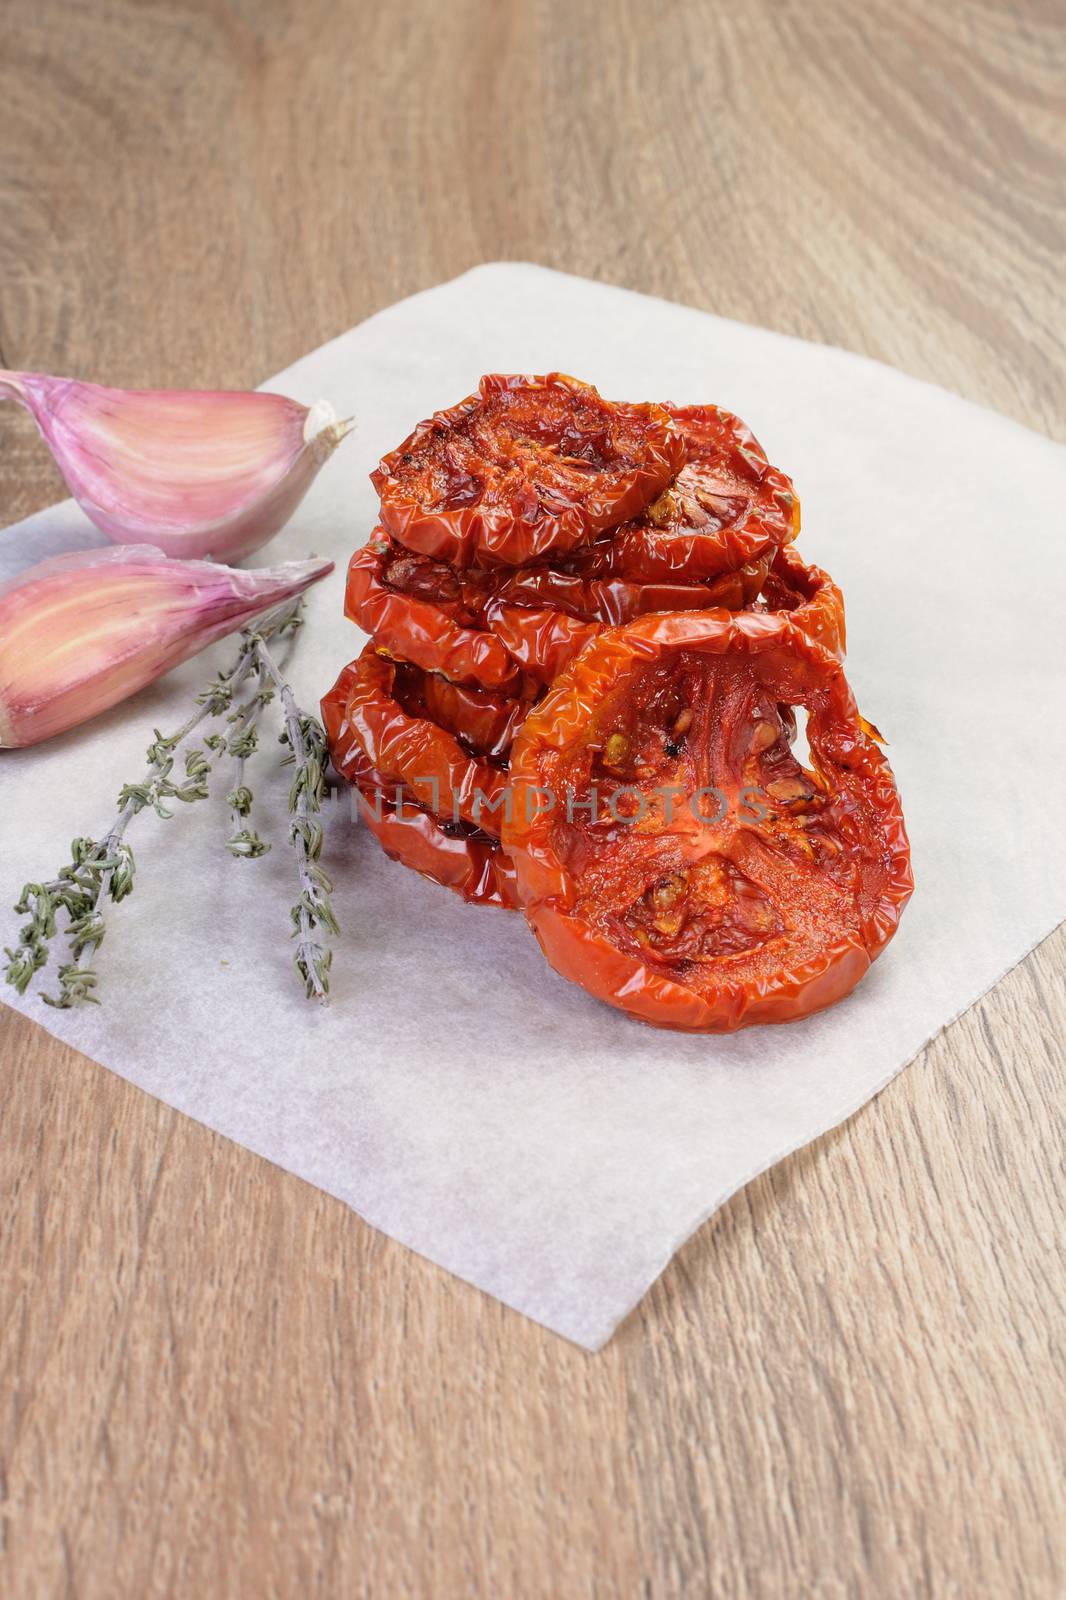 Sun-dried tomatoes  by Apolonia